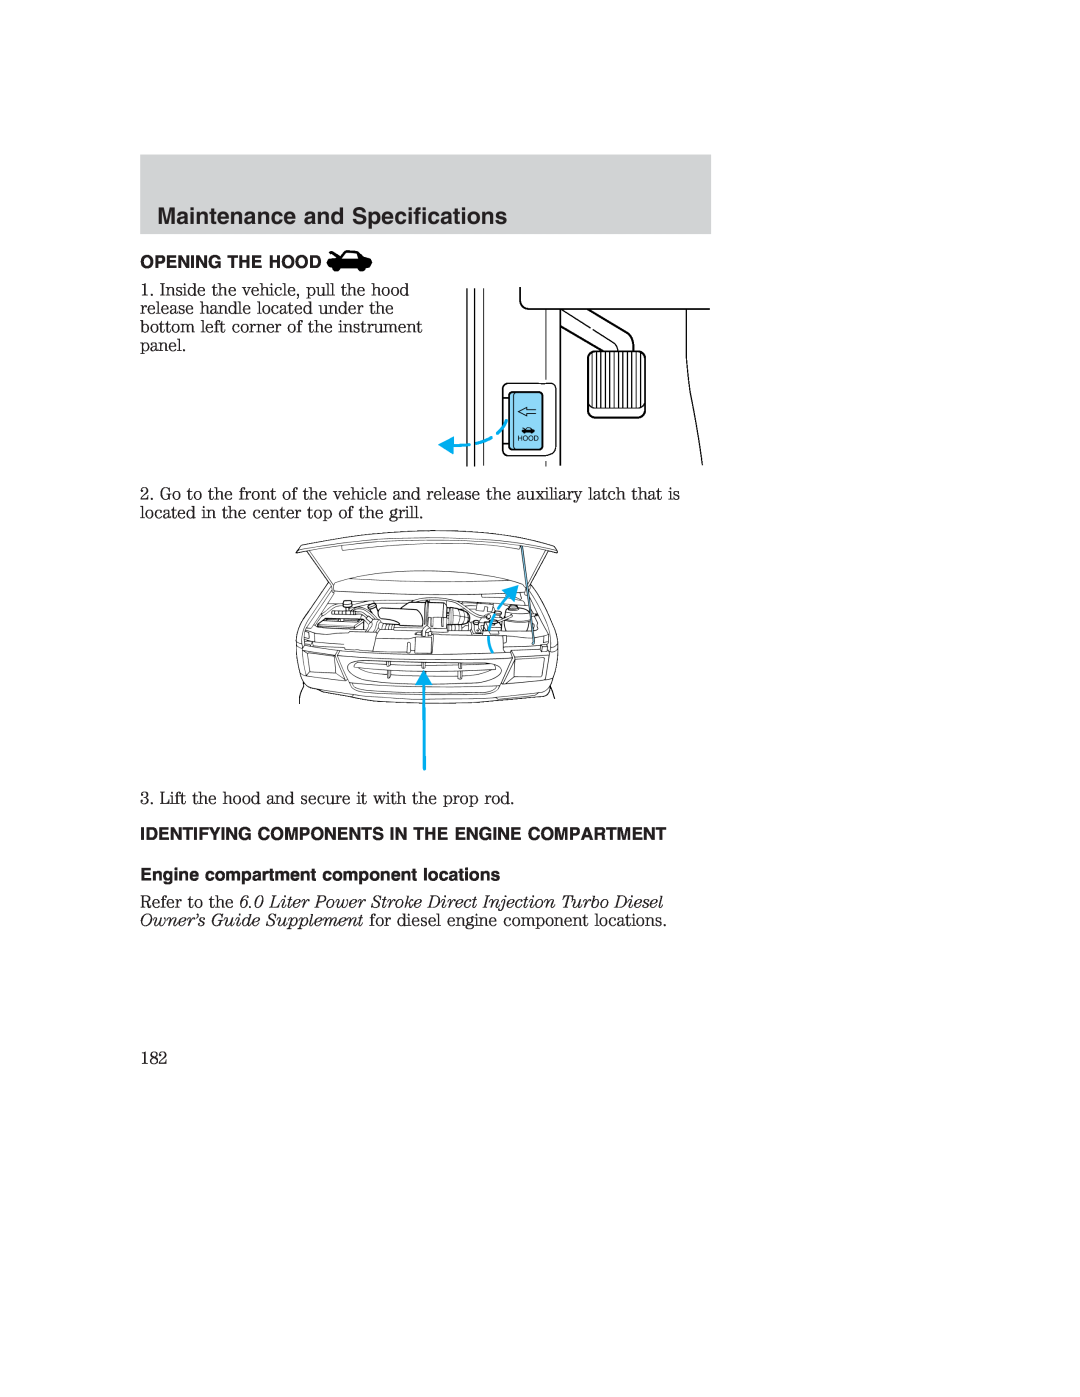 Ford AM/FM stereo manual Opening The Hood, Identifying Components In The Engine Compartment, Maintenance and Specifications 